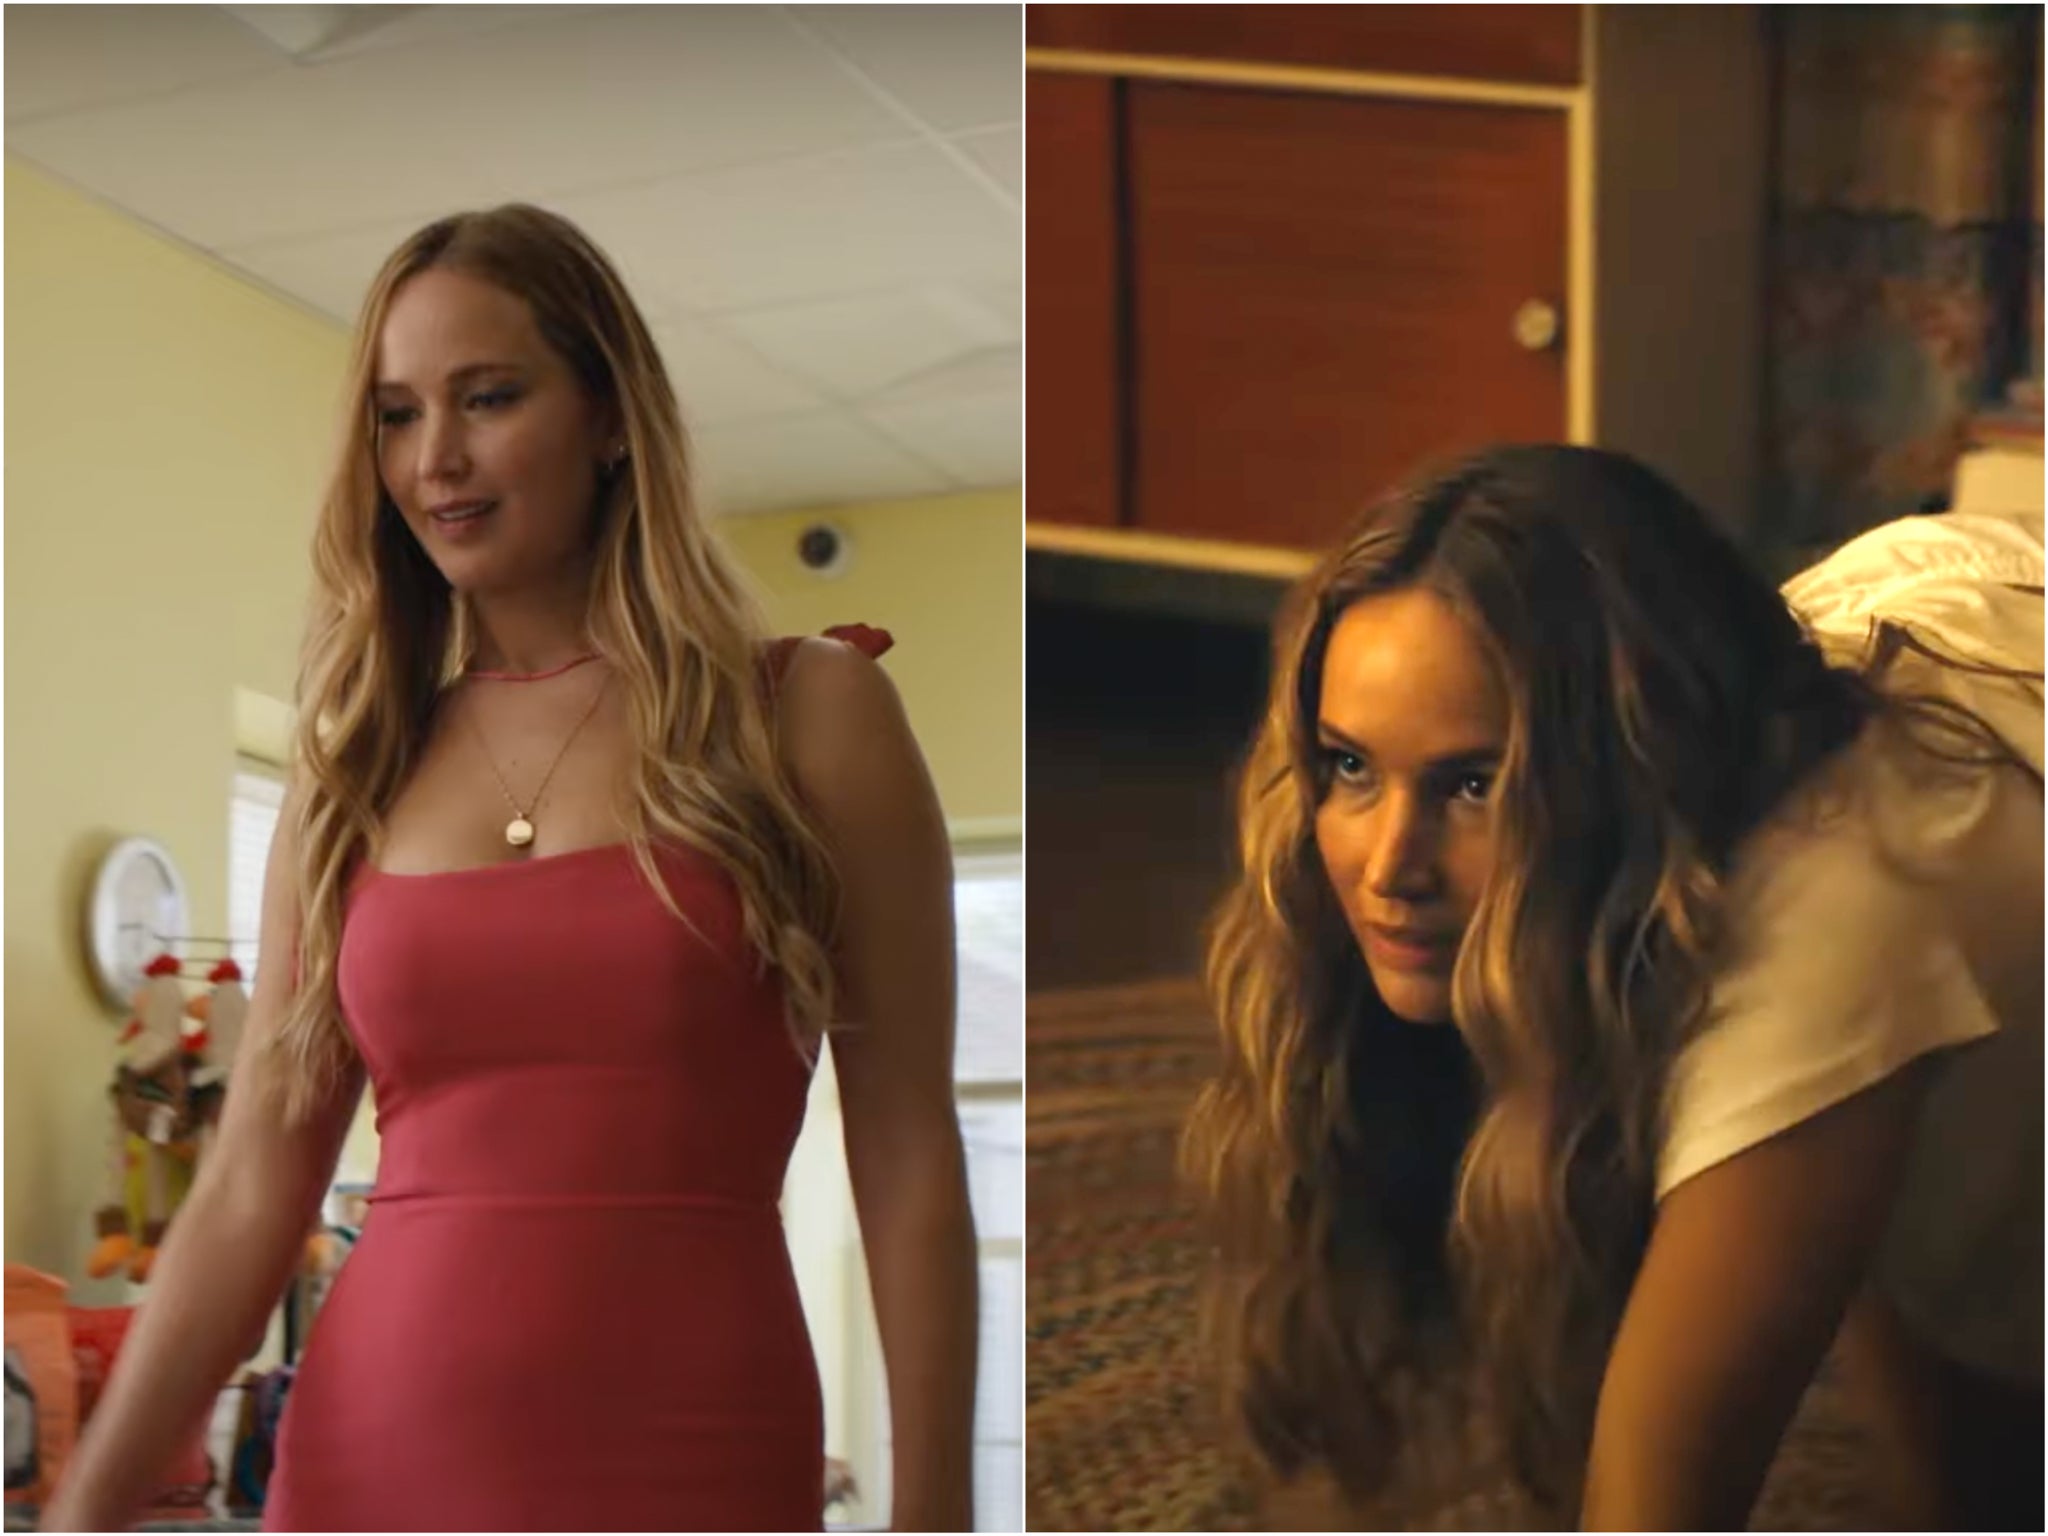 No Hard Feelings Jennifer Lawrence is hired to seduce a 19-year-old boy in new trailer The Independent